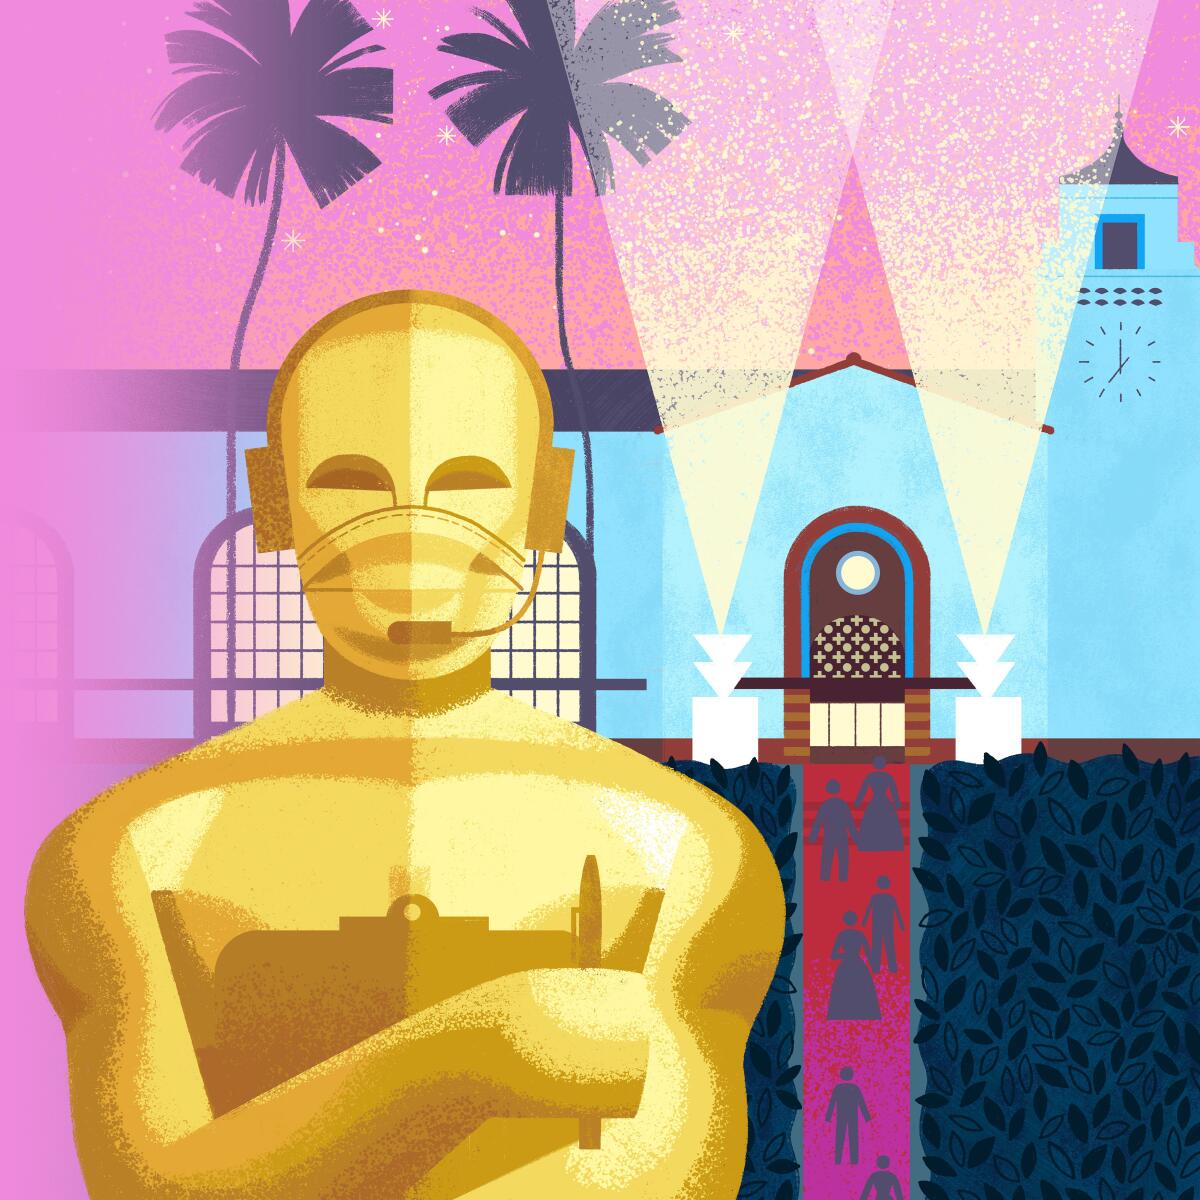 A very different Oscars is planned this year at L.A.'s Union Station.